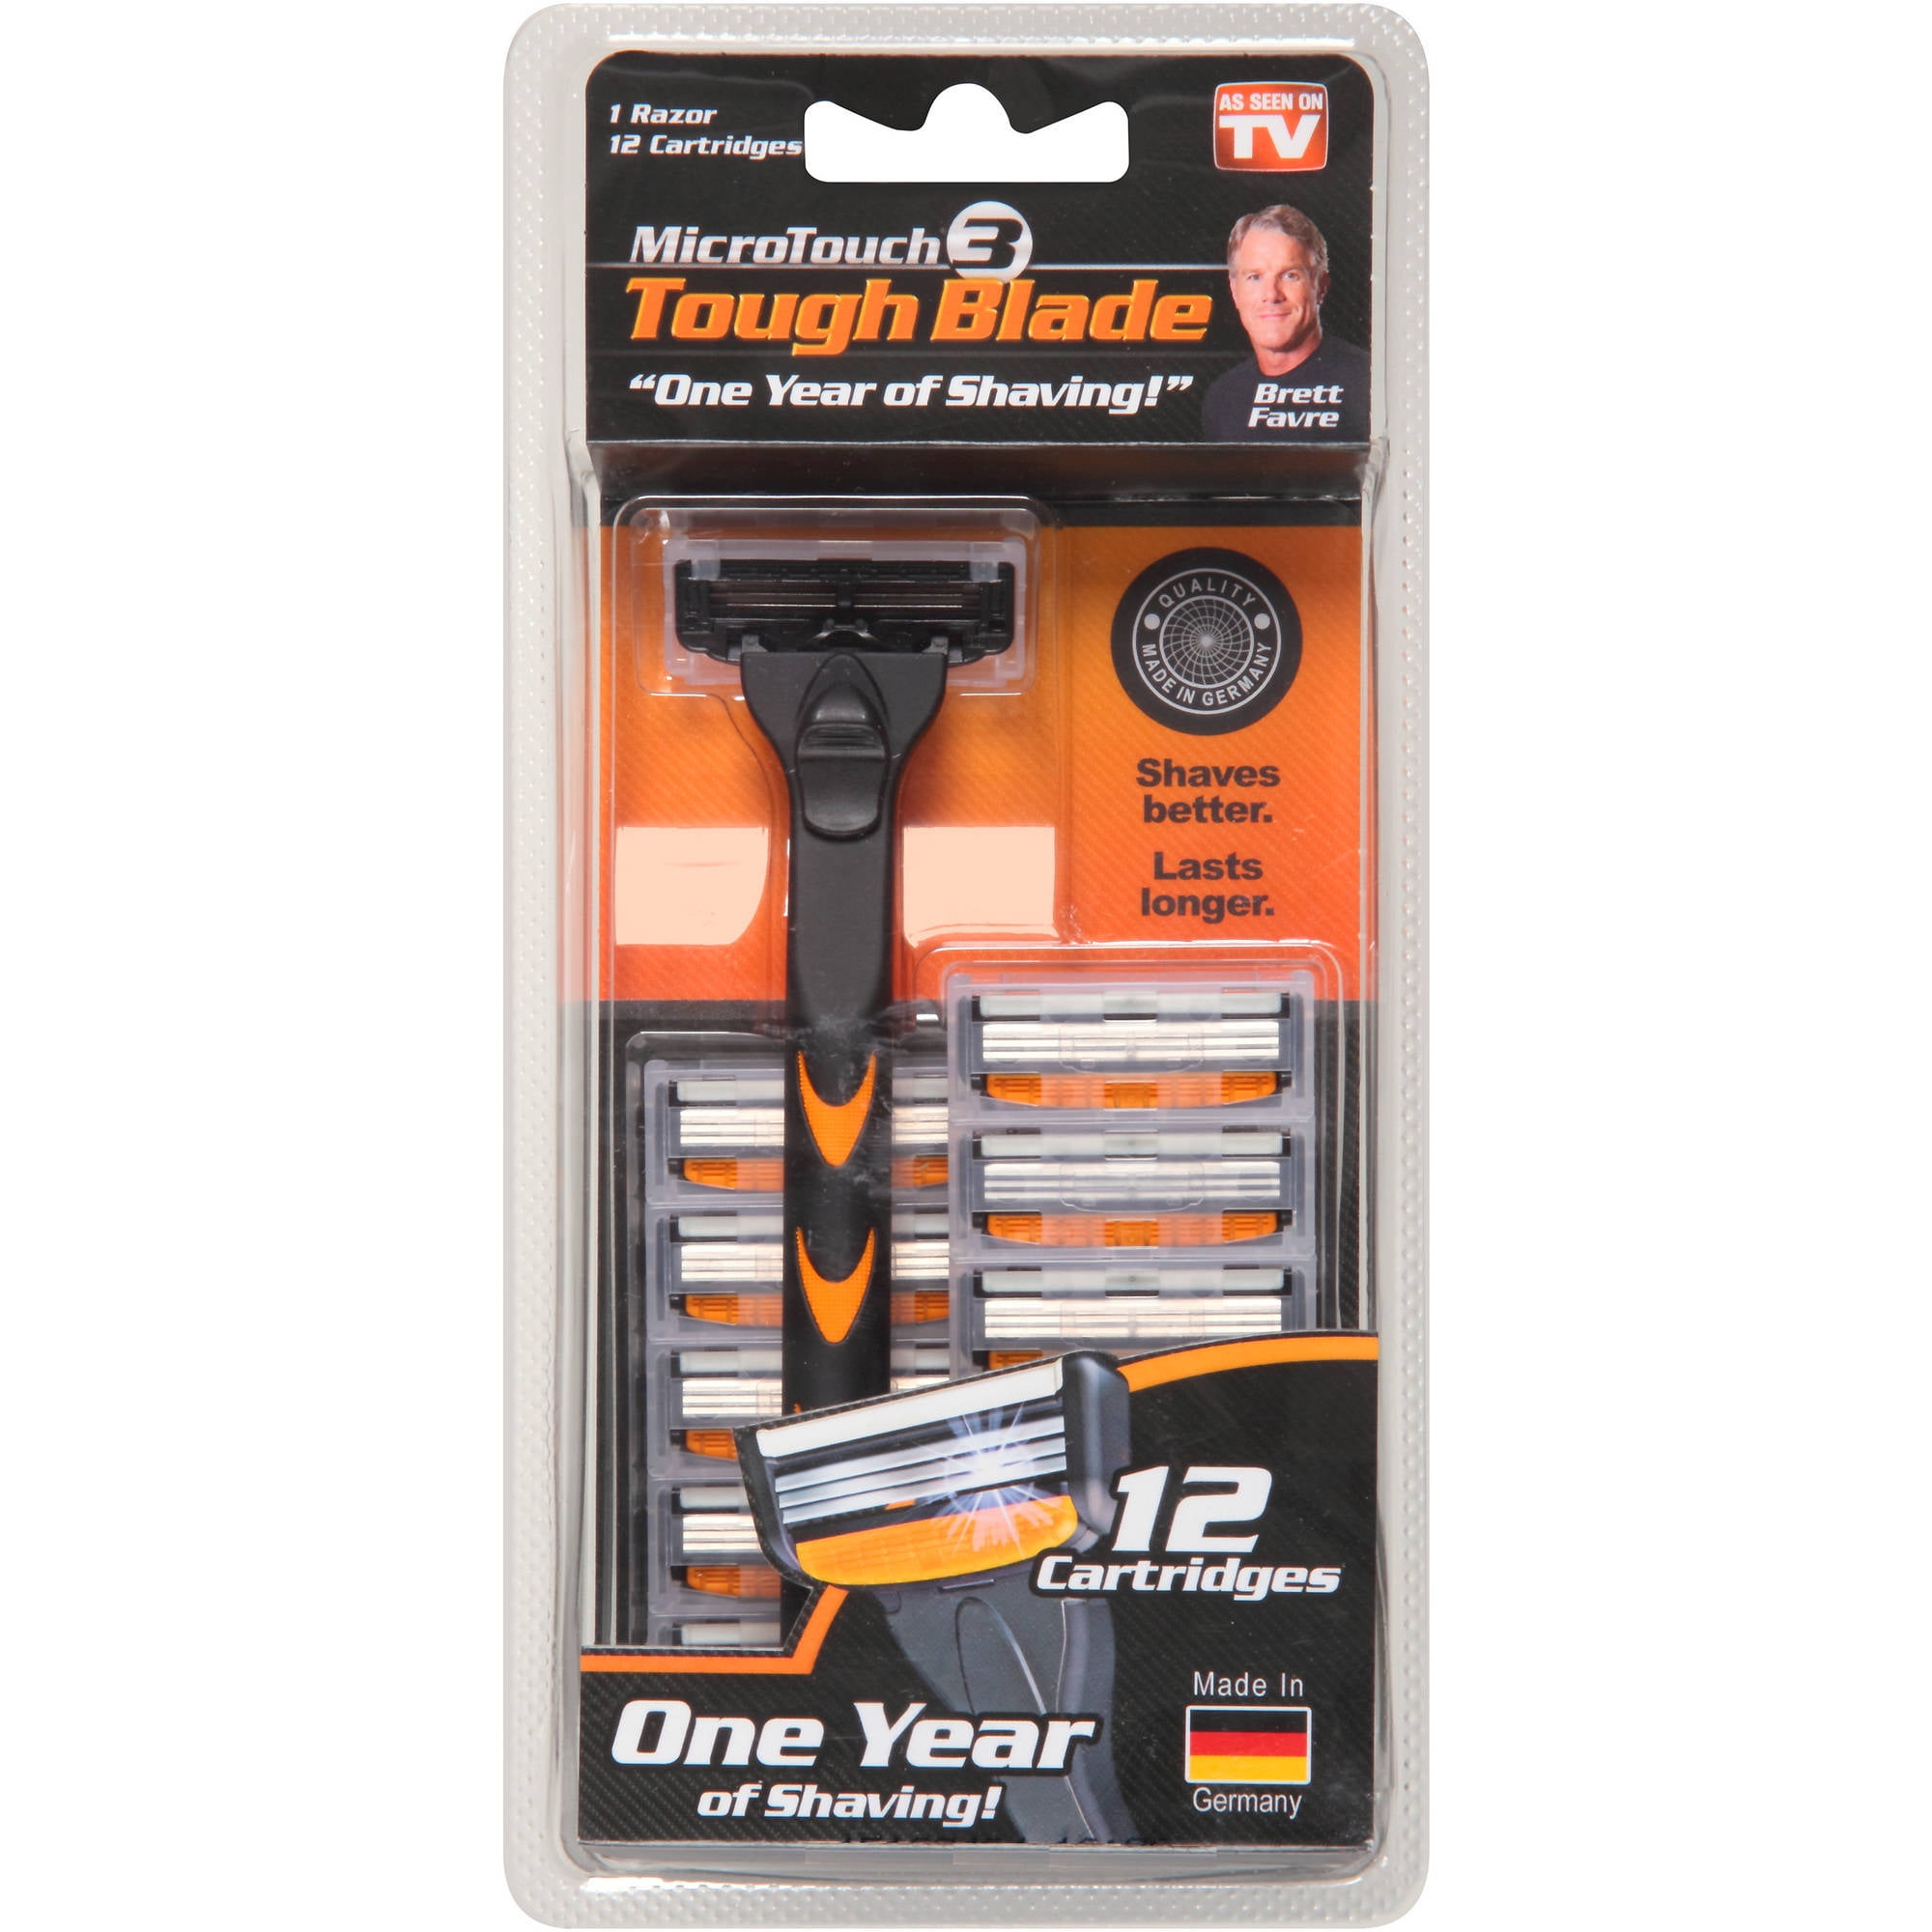 MicroTouch 3 Tough Blade Razor with 12 Replacement Cartridges - Walmart.com